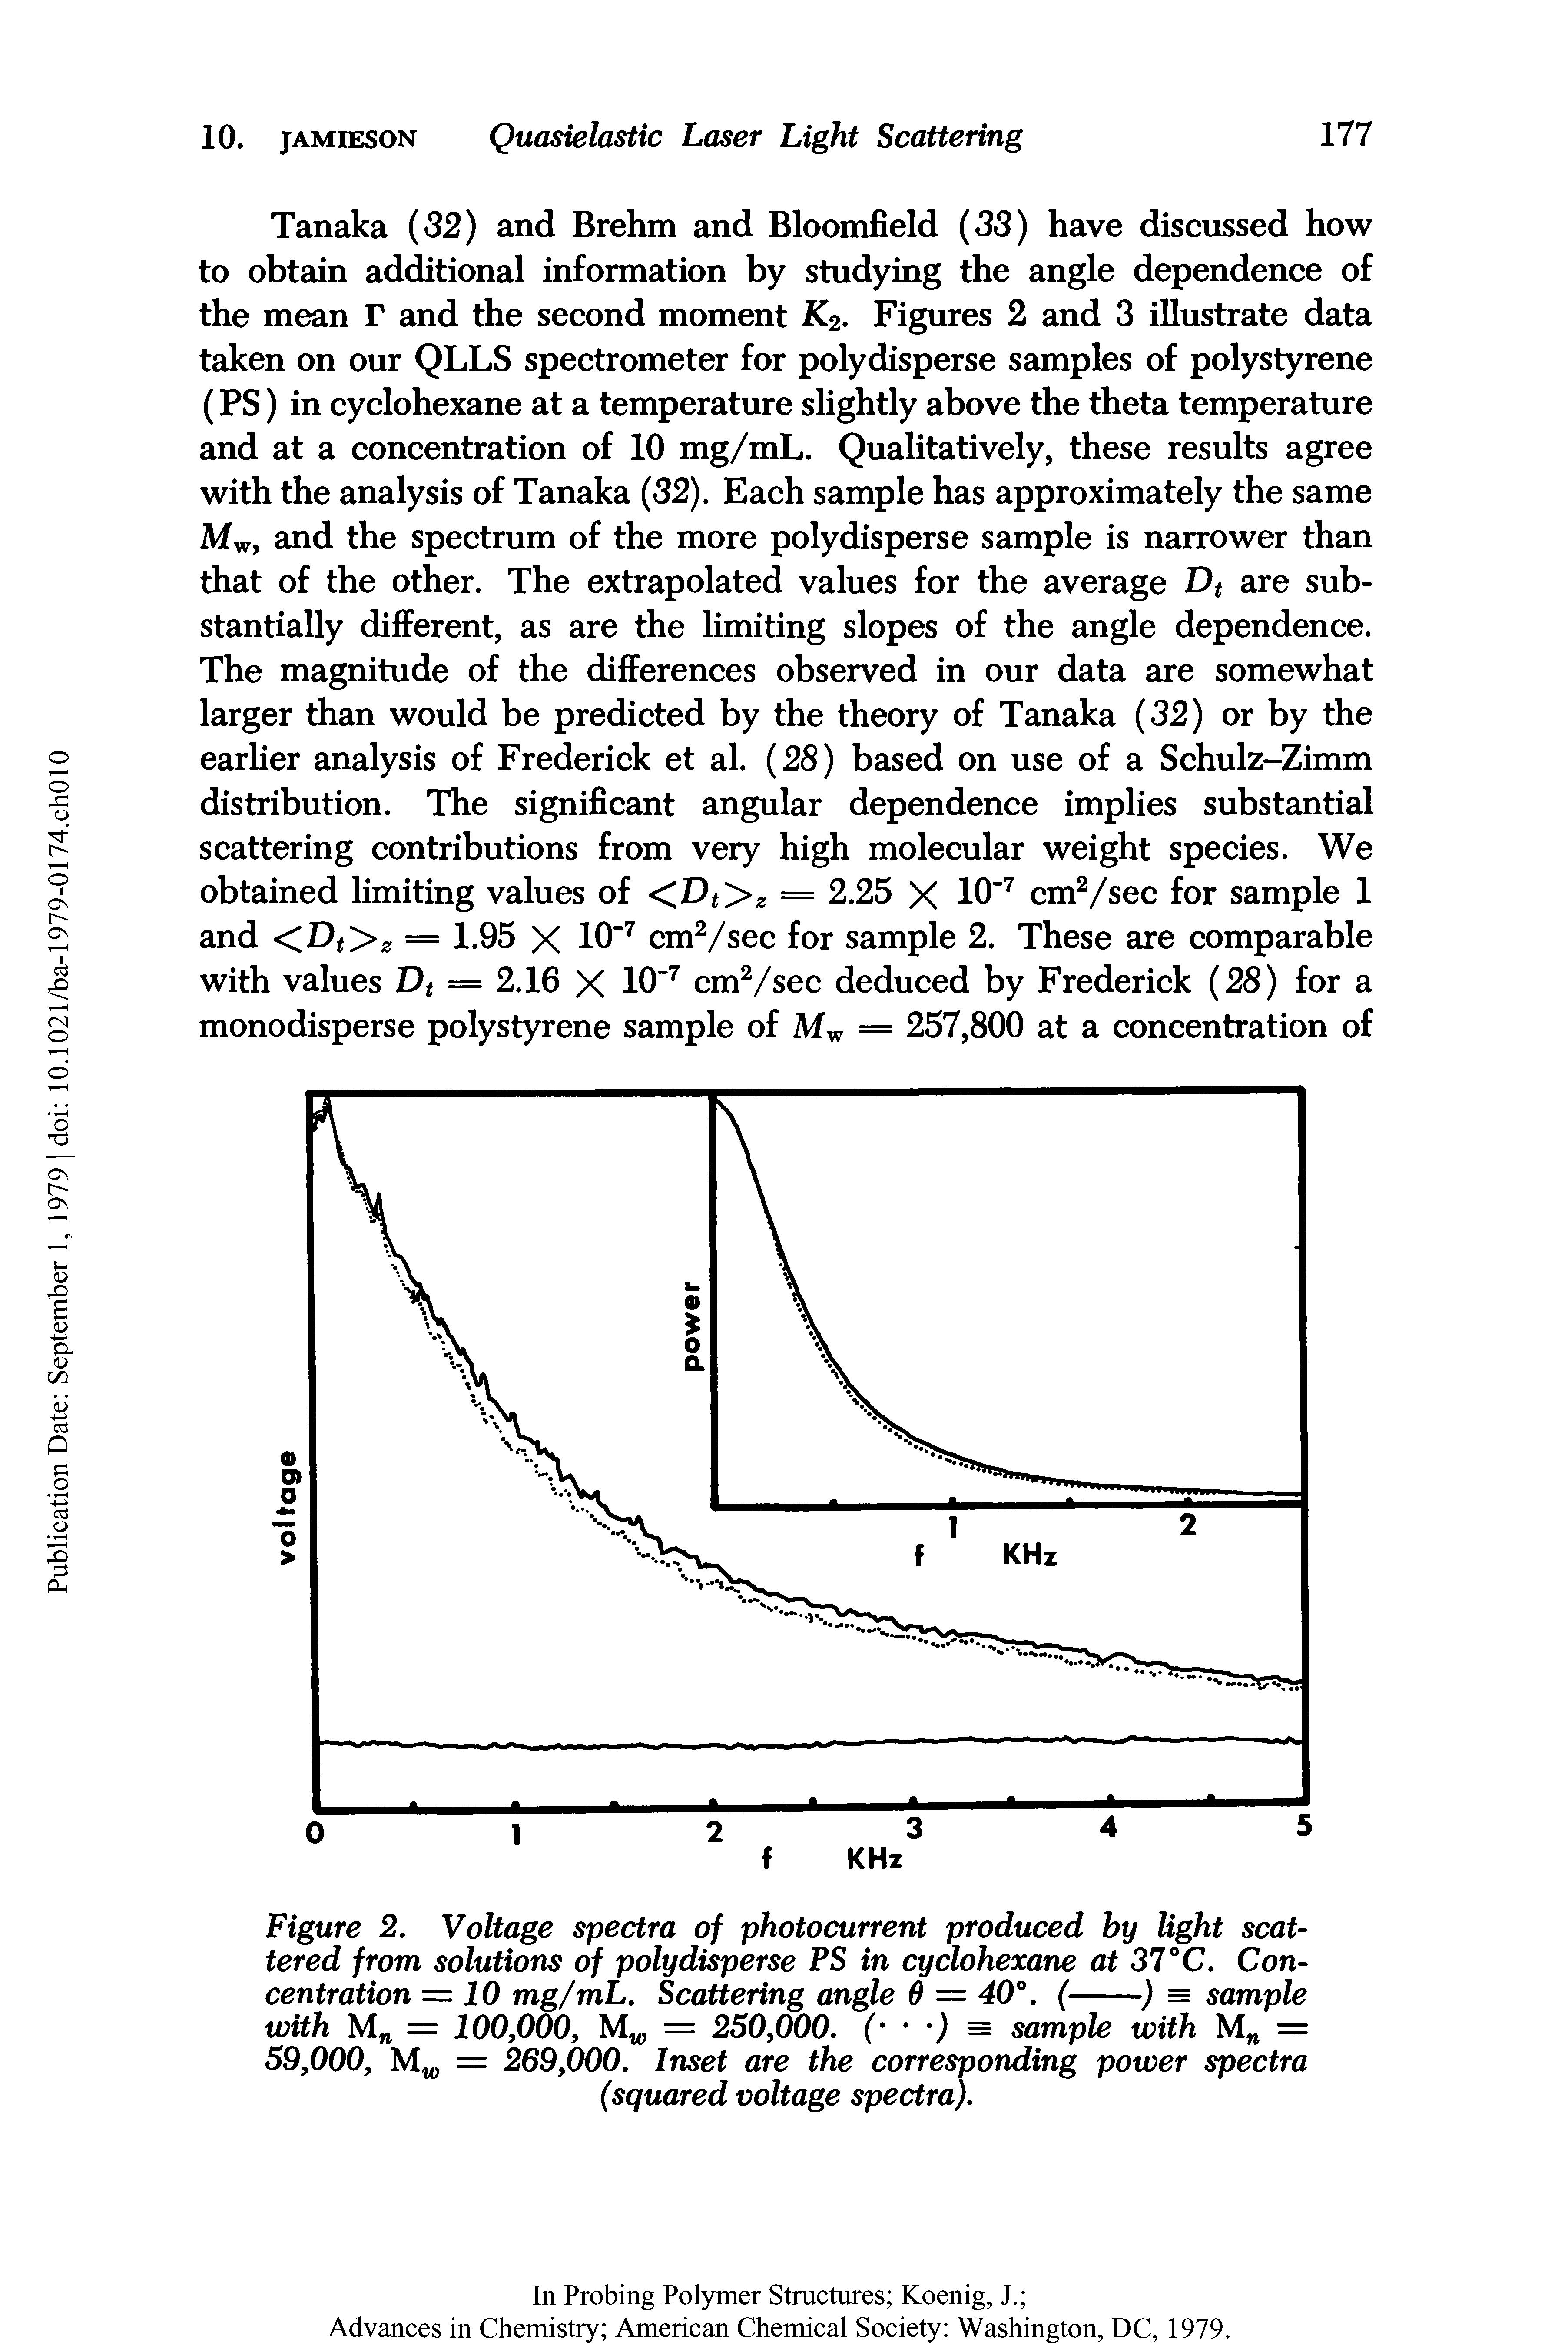 Figure 2. Voltage spectra of photocurrent produced by light scat-tered from solutions of polydisperse PS in cyclohexane at 37°C. Concentration = 10 mg/mL, Scattering angle 6 = 40°, (--------) = sample...